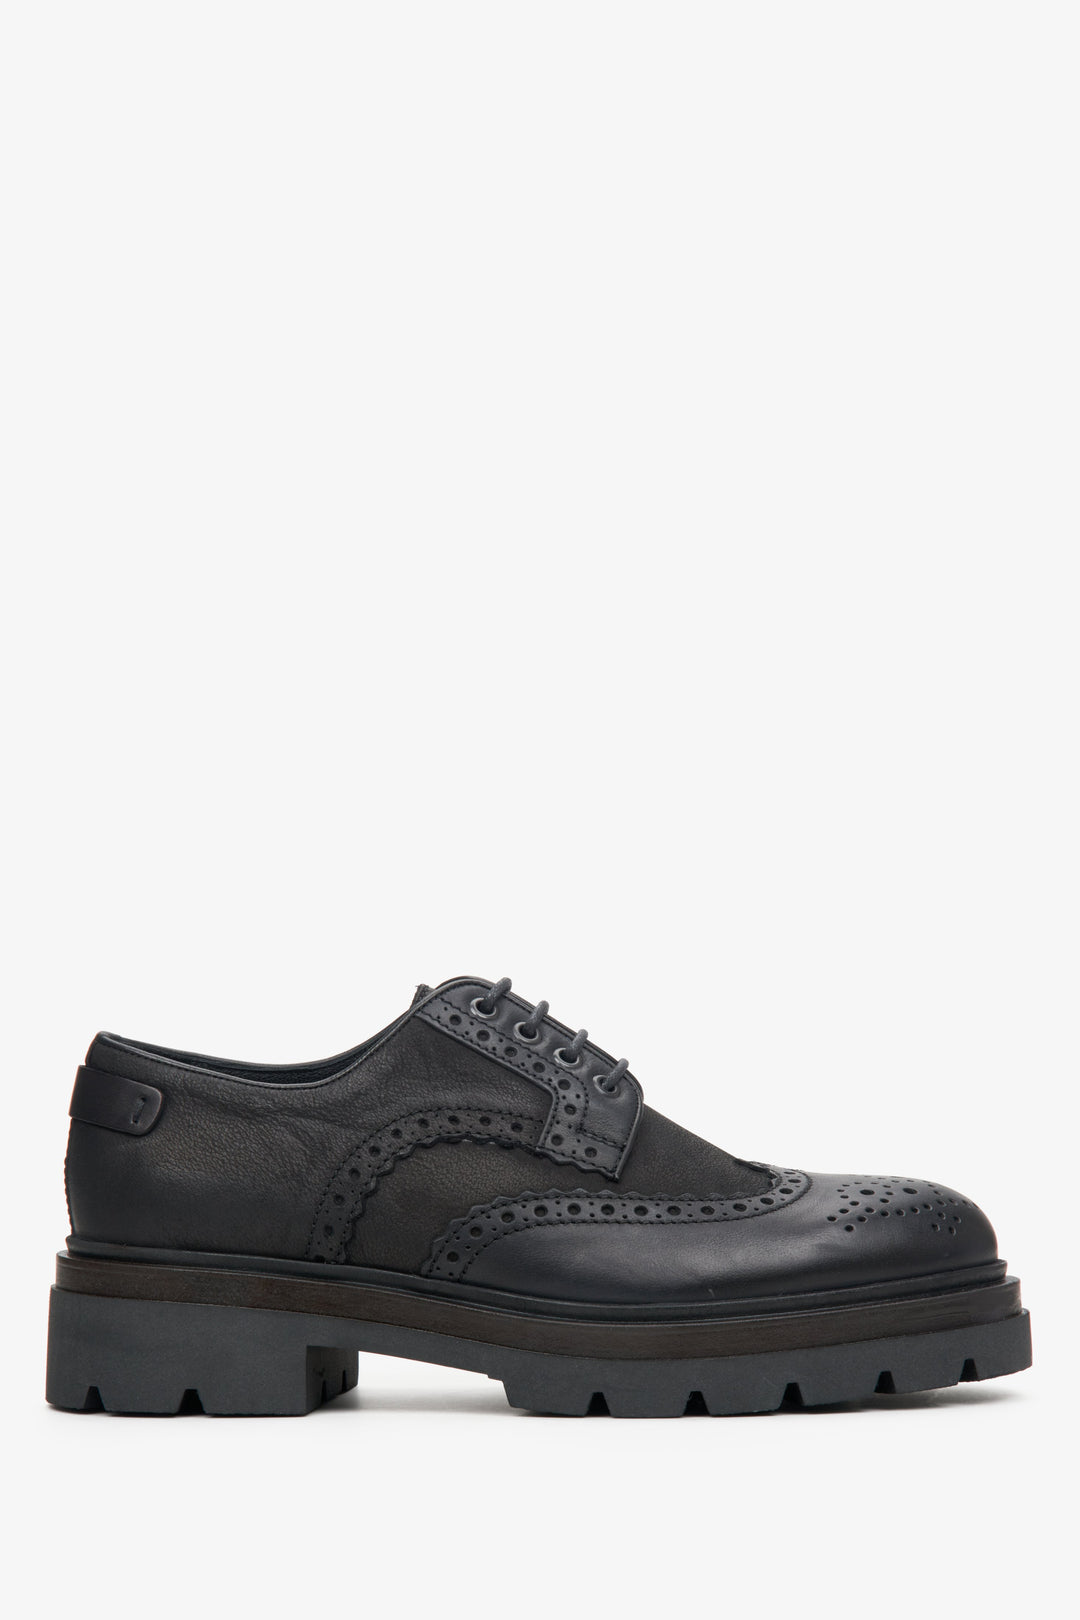 Men's Black Leather Oxford Boots with Lacing Estro ER00113792.